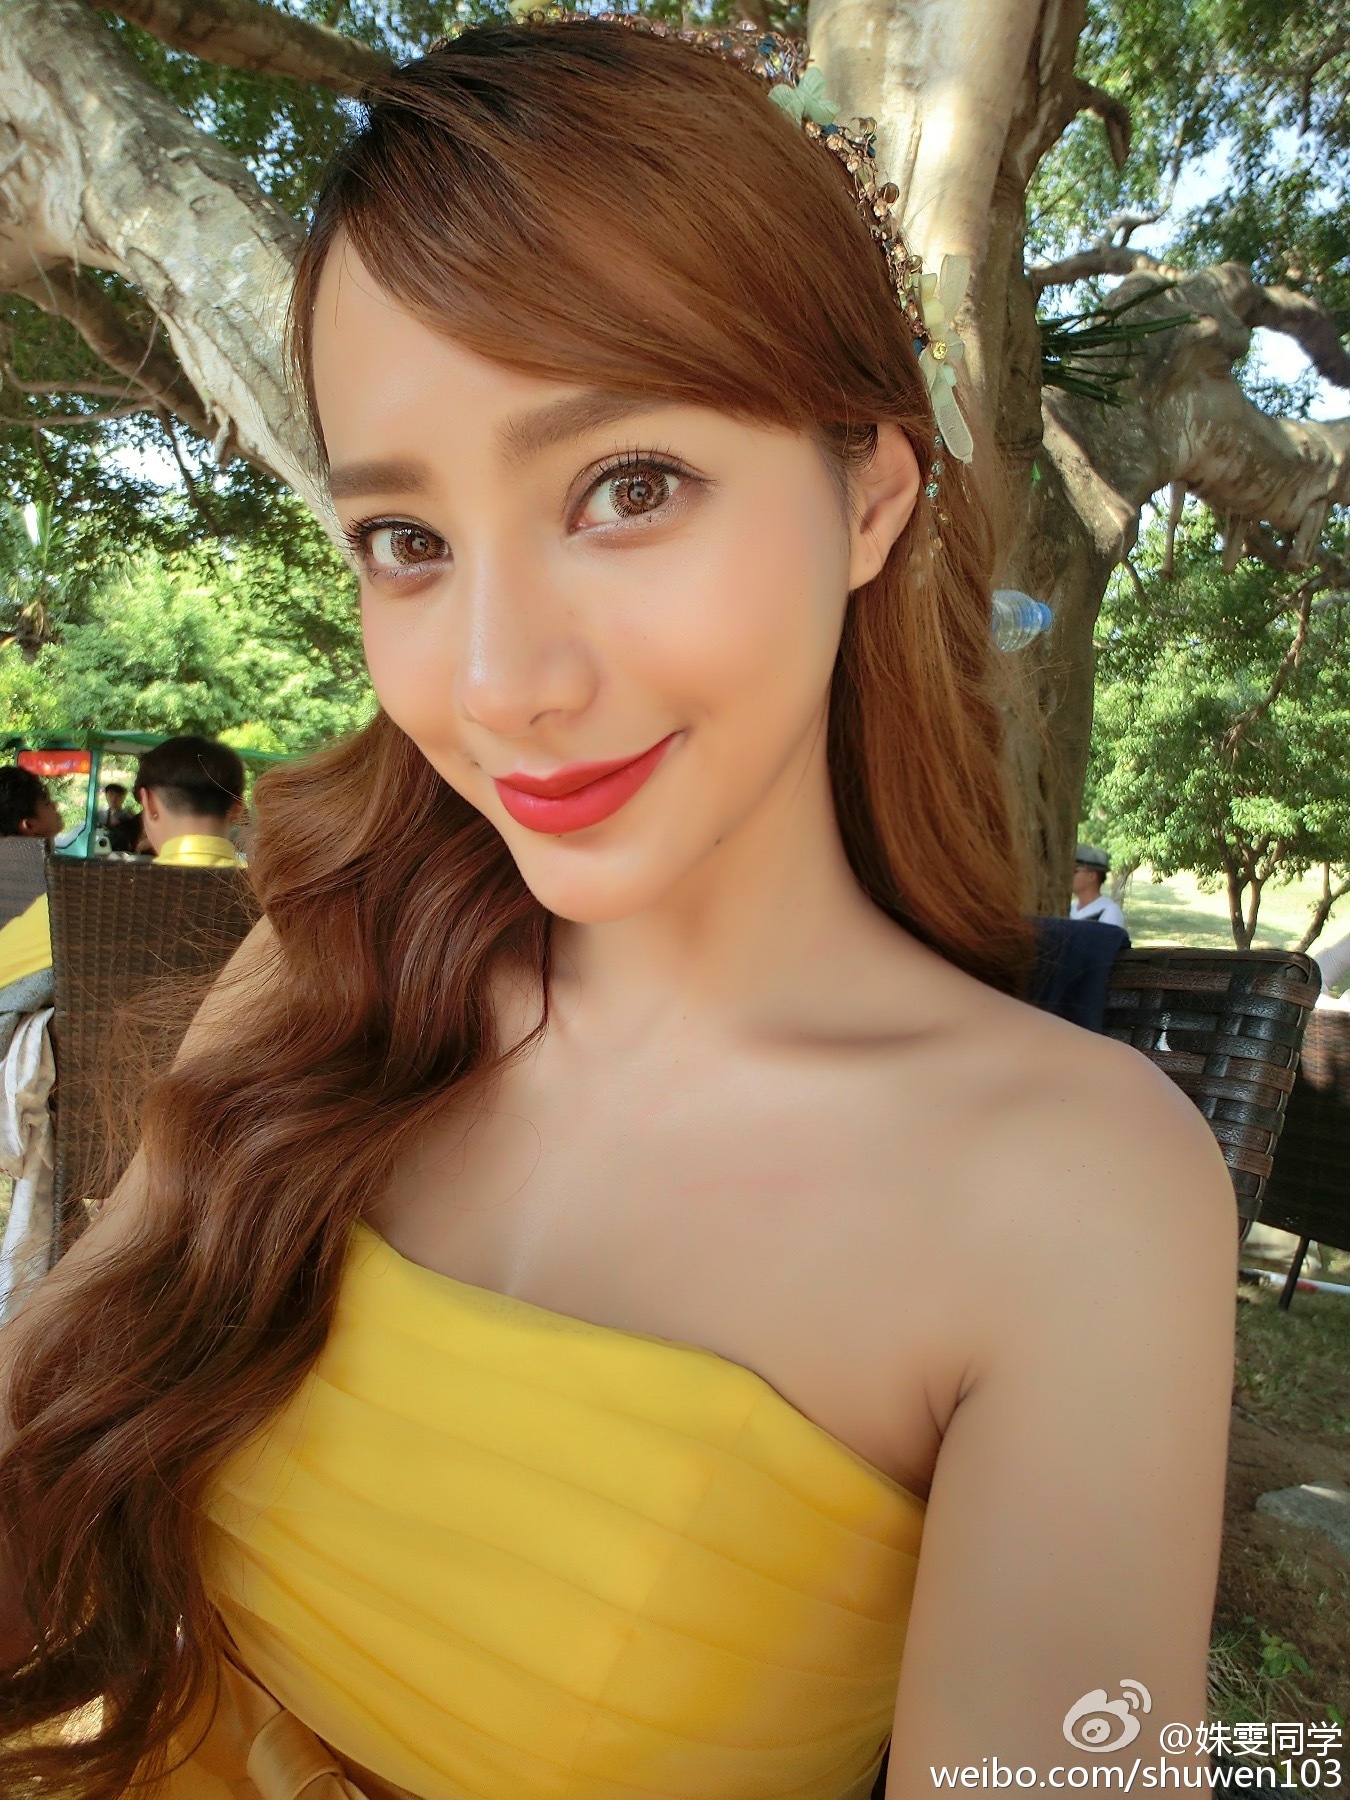 Shu Wen, a Chinese Russian mixed blood student of Fu Normal University, became popular in private photo 2